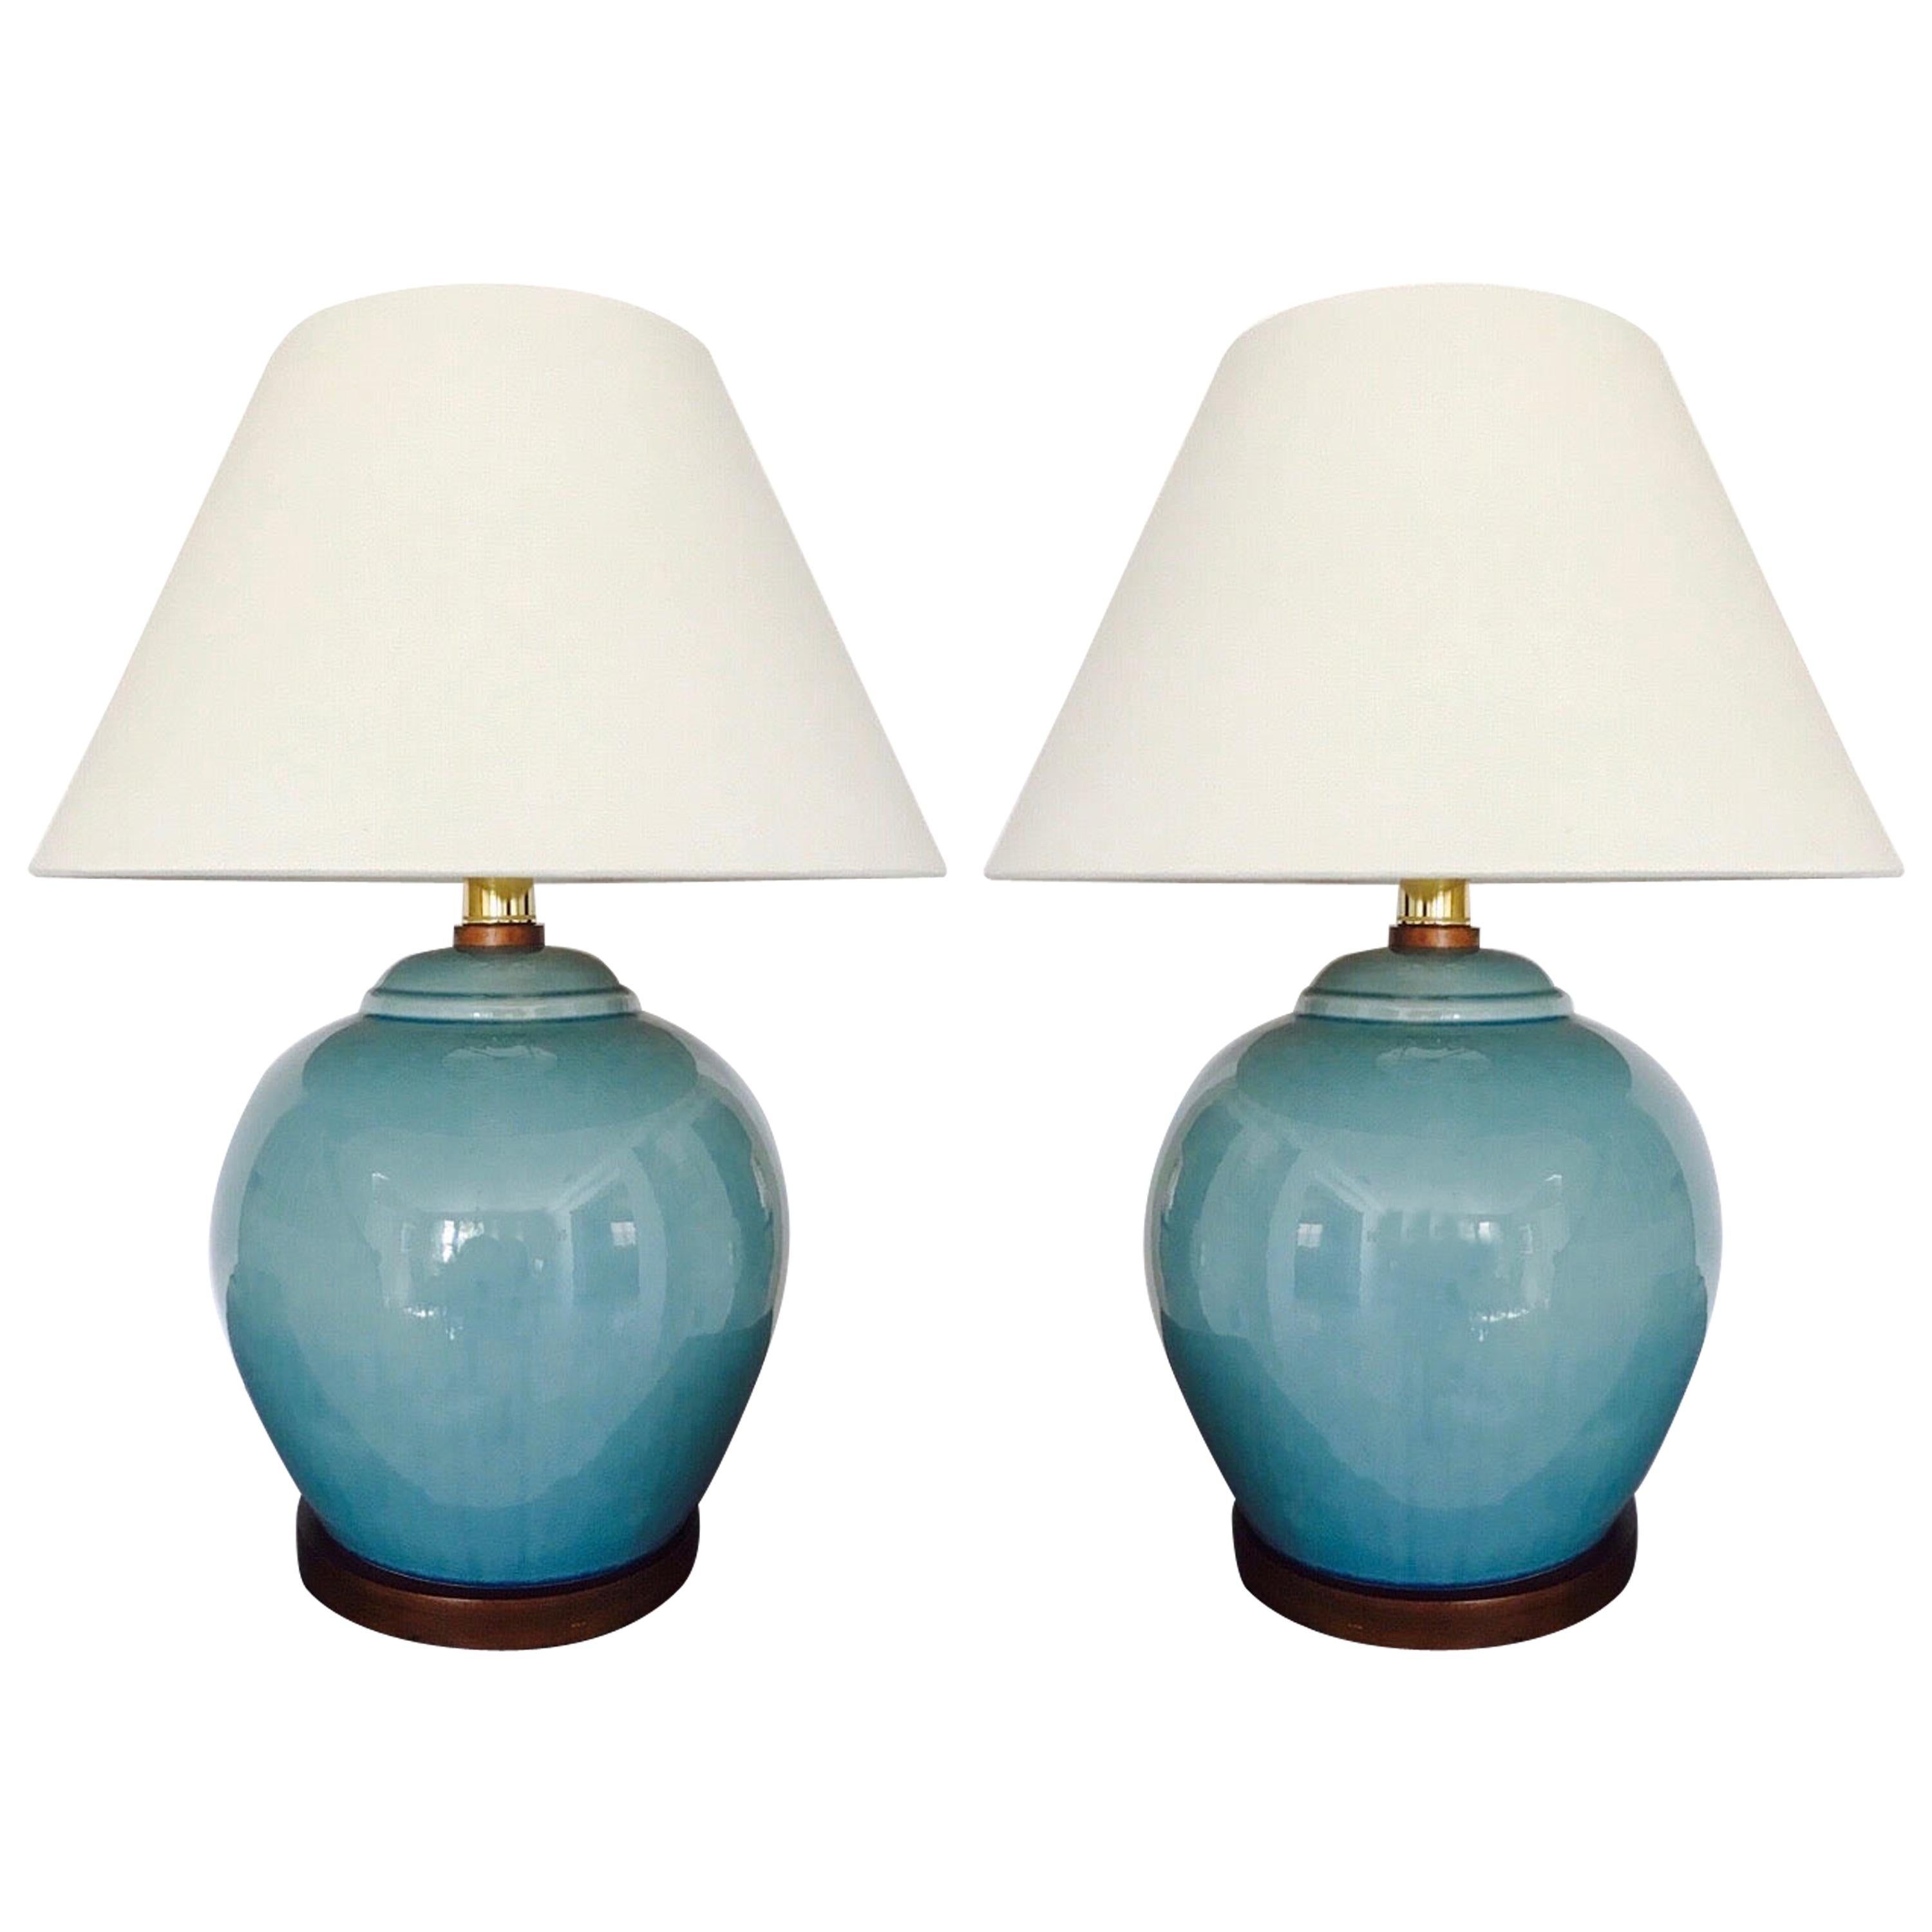 Pair of Vintage Ralph Lauren Chinese Pottery Lamps in Robin's Egg Blue